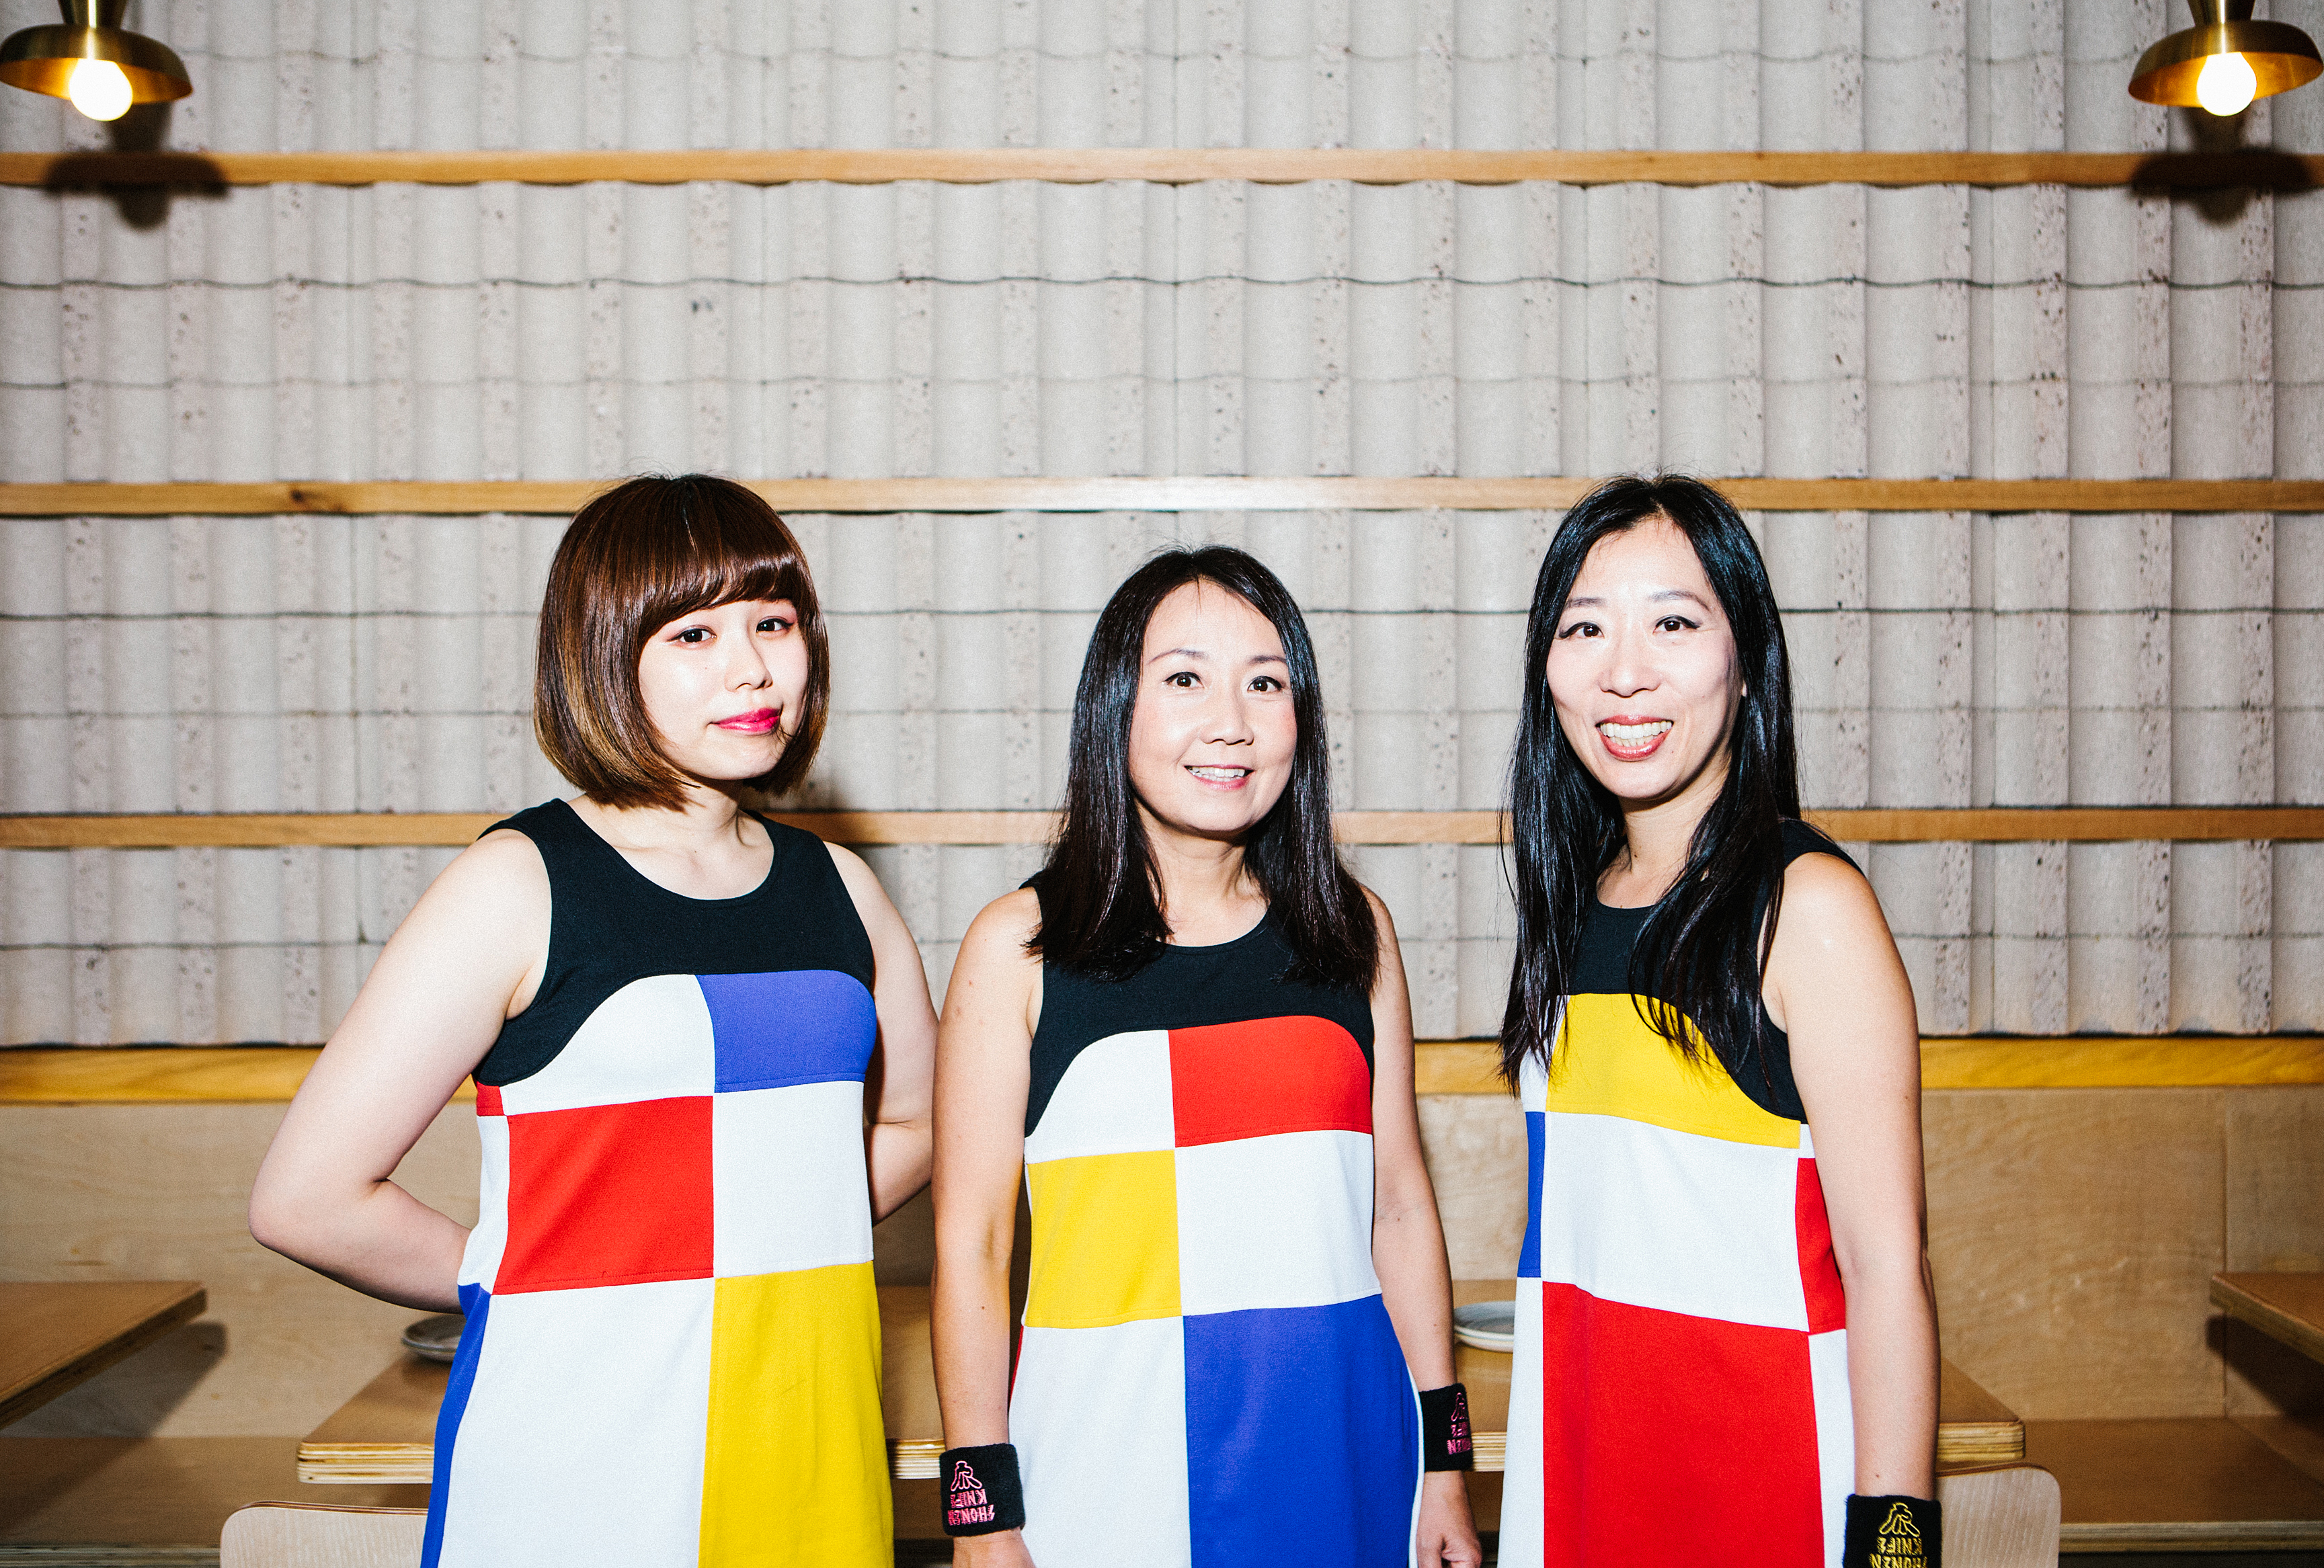 For our interview, Risa, Naoko and Atsuko changed into their signature outfits: geometric-patterned dresses, designed by Atsuko, reminiscent of a Mondrian painting.